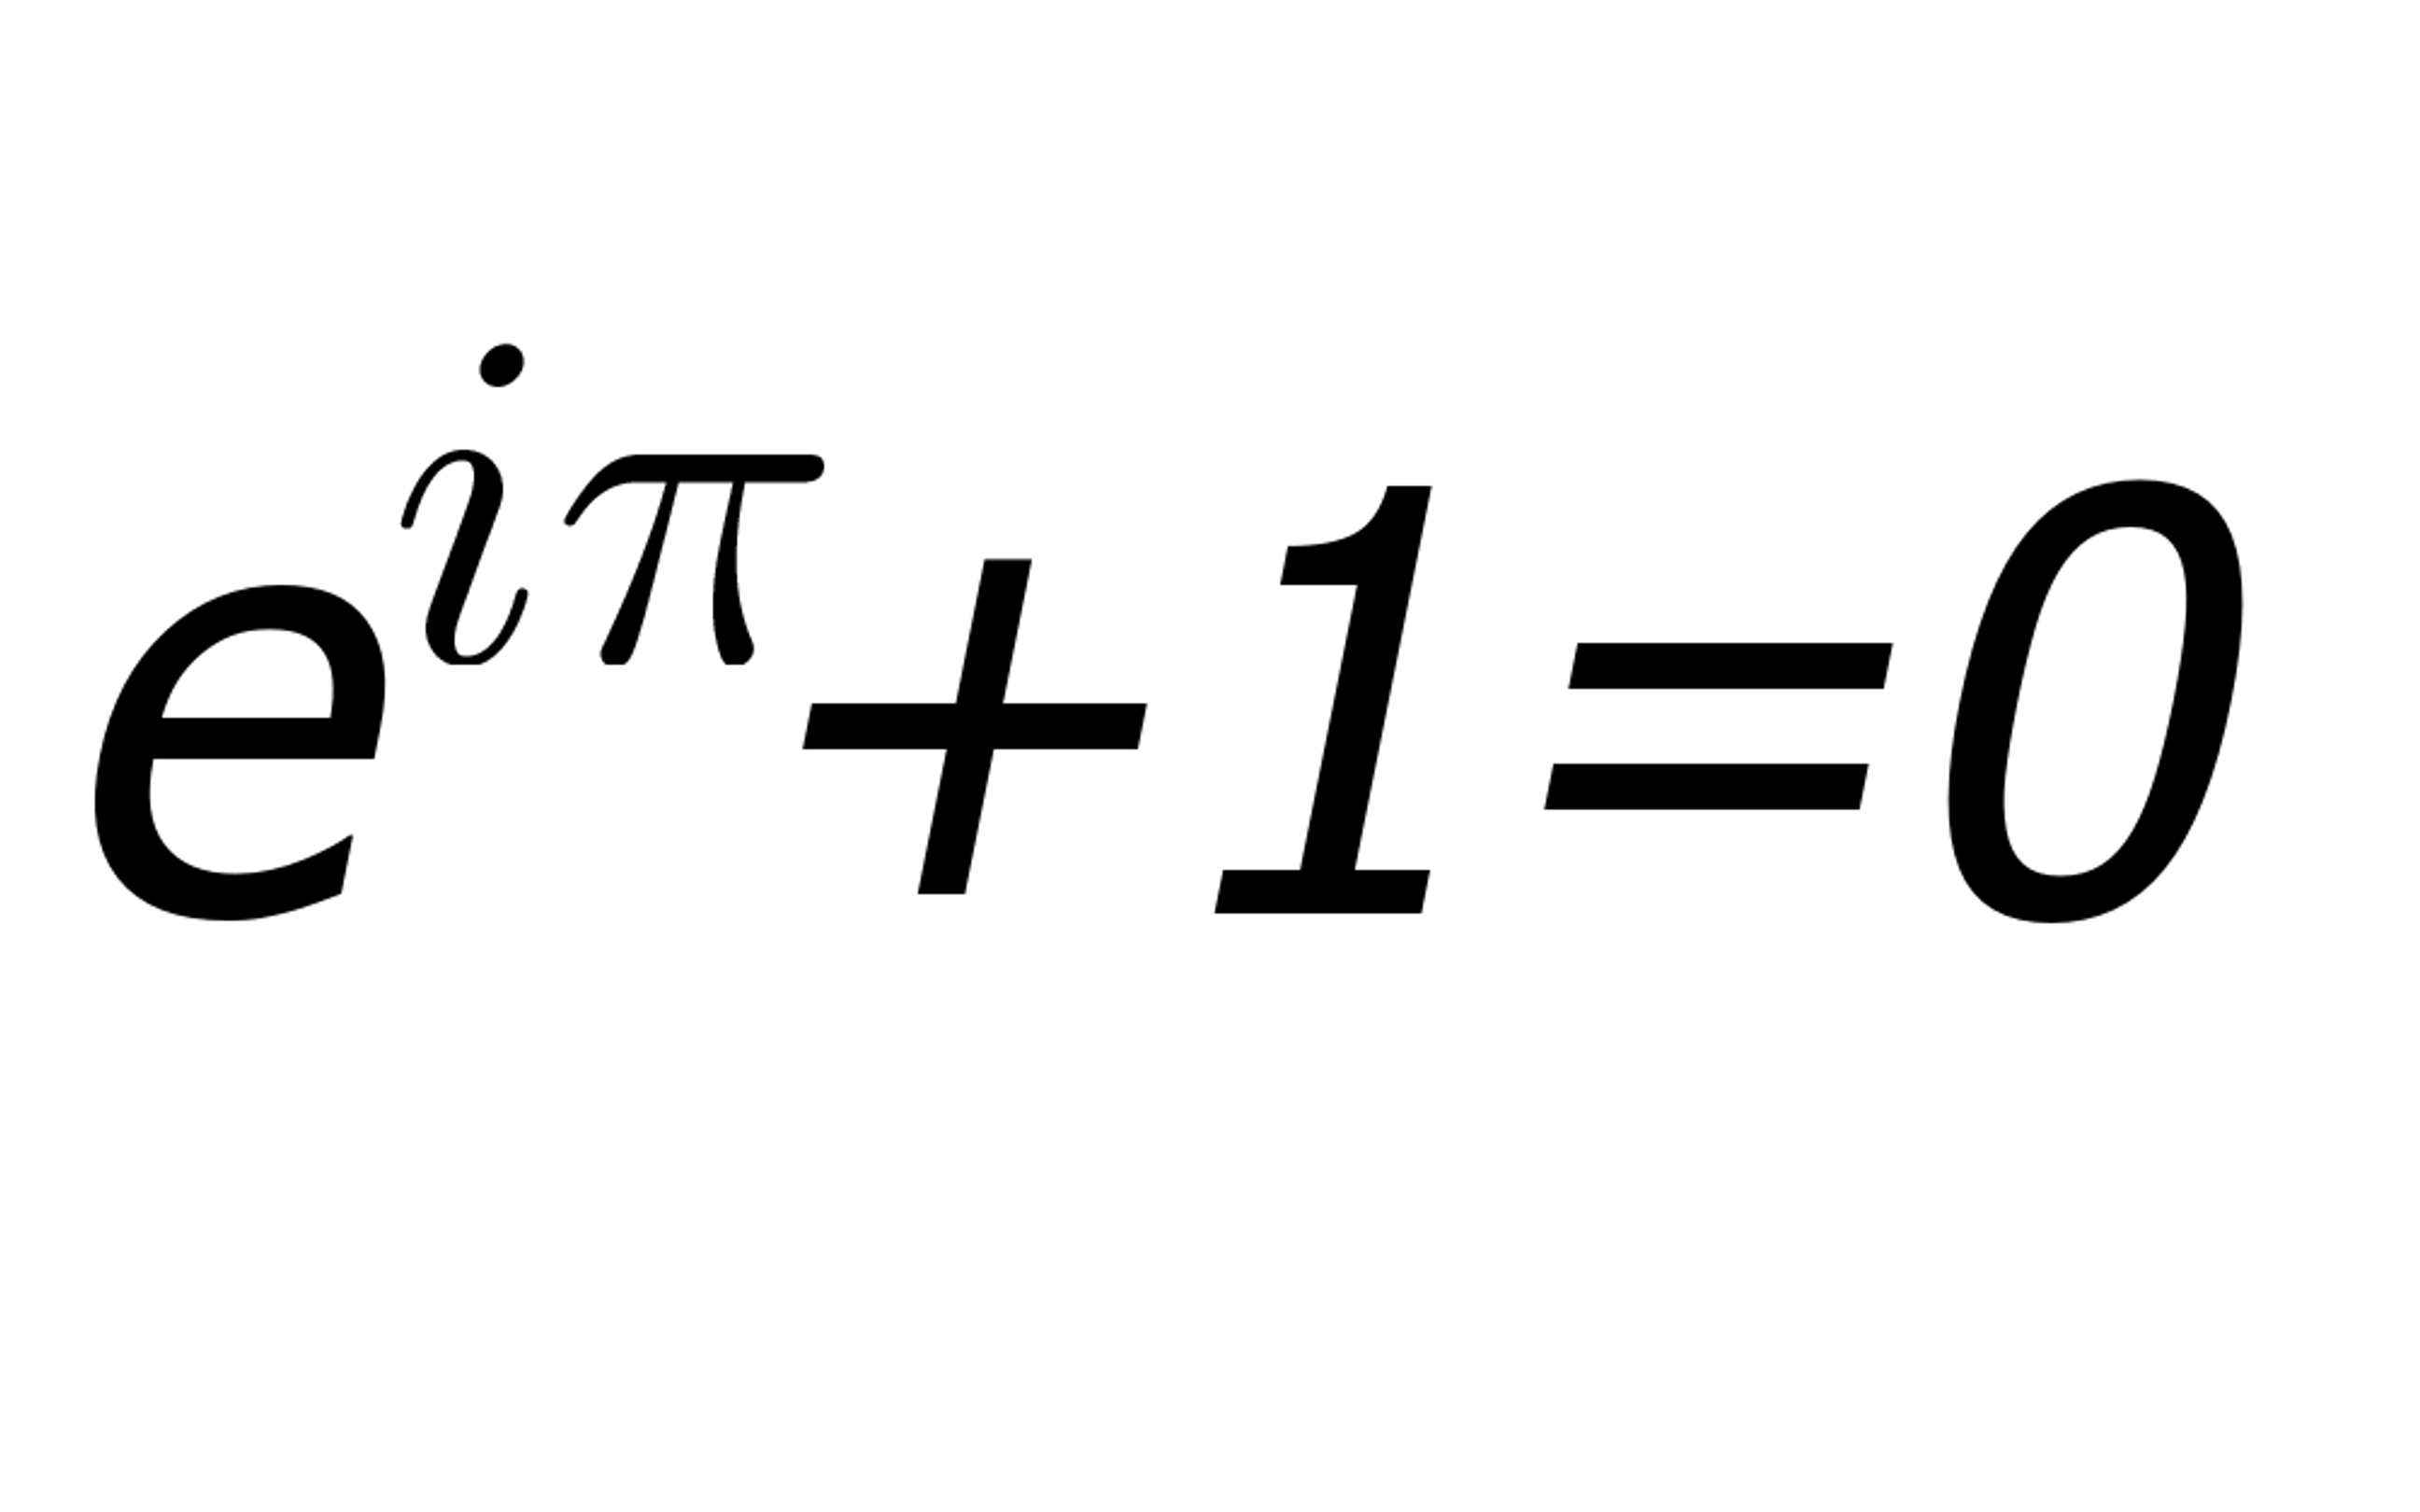 Euler's Identity: 'The Most Beautiful Equation' | Live Science